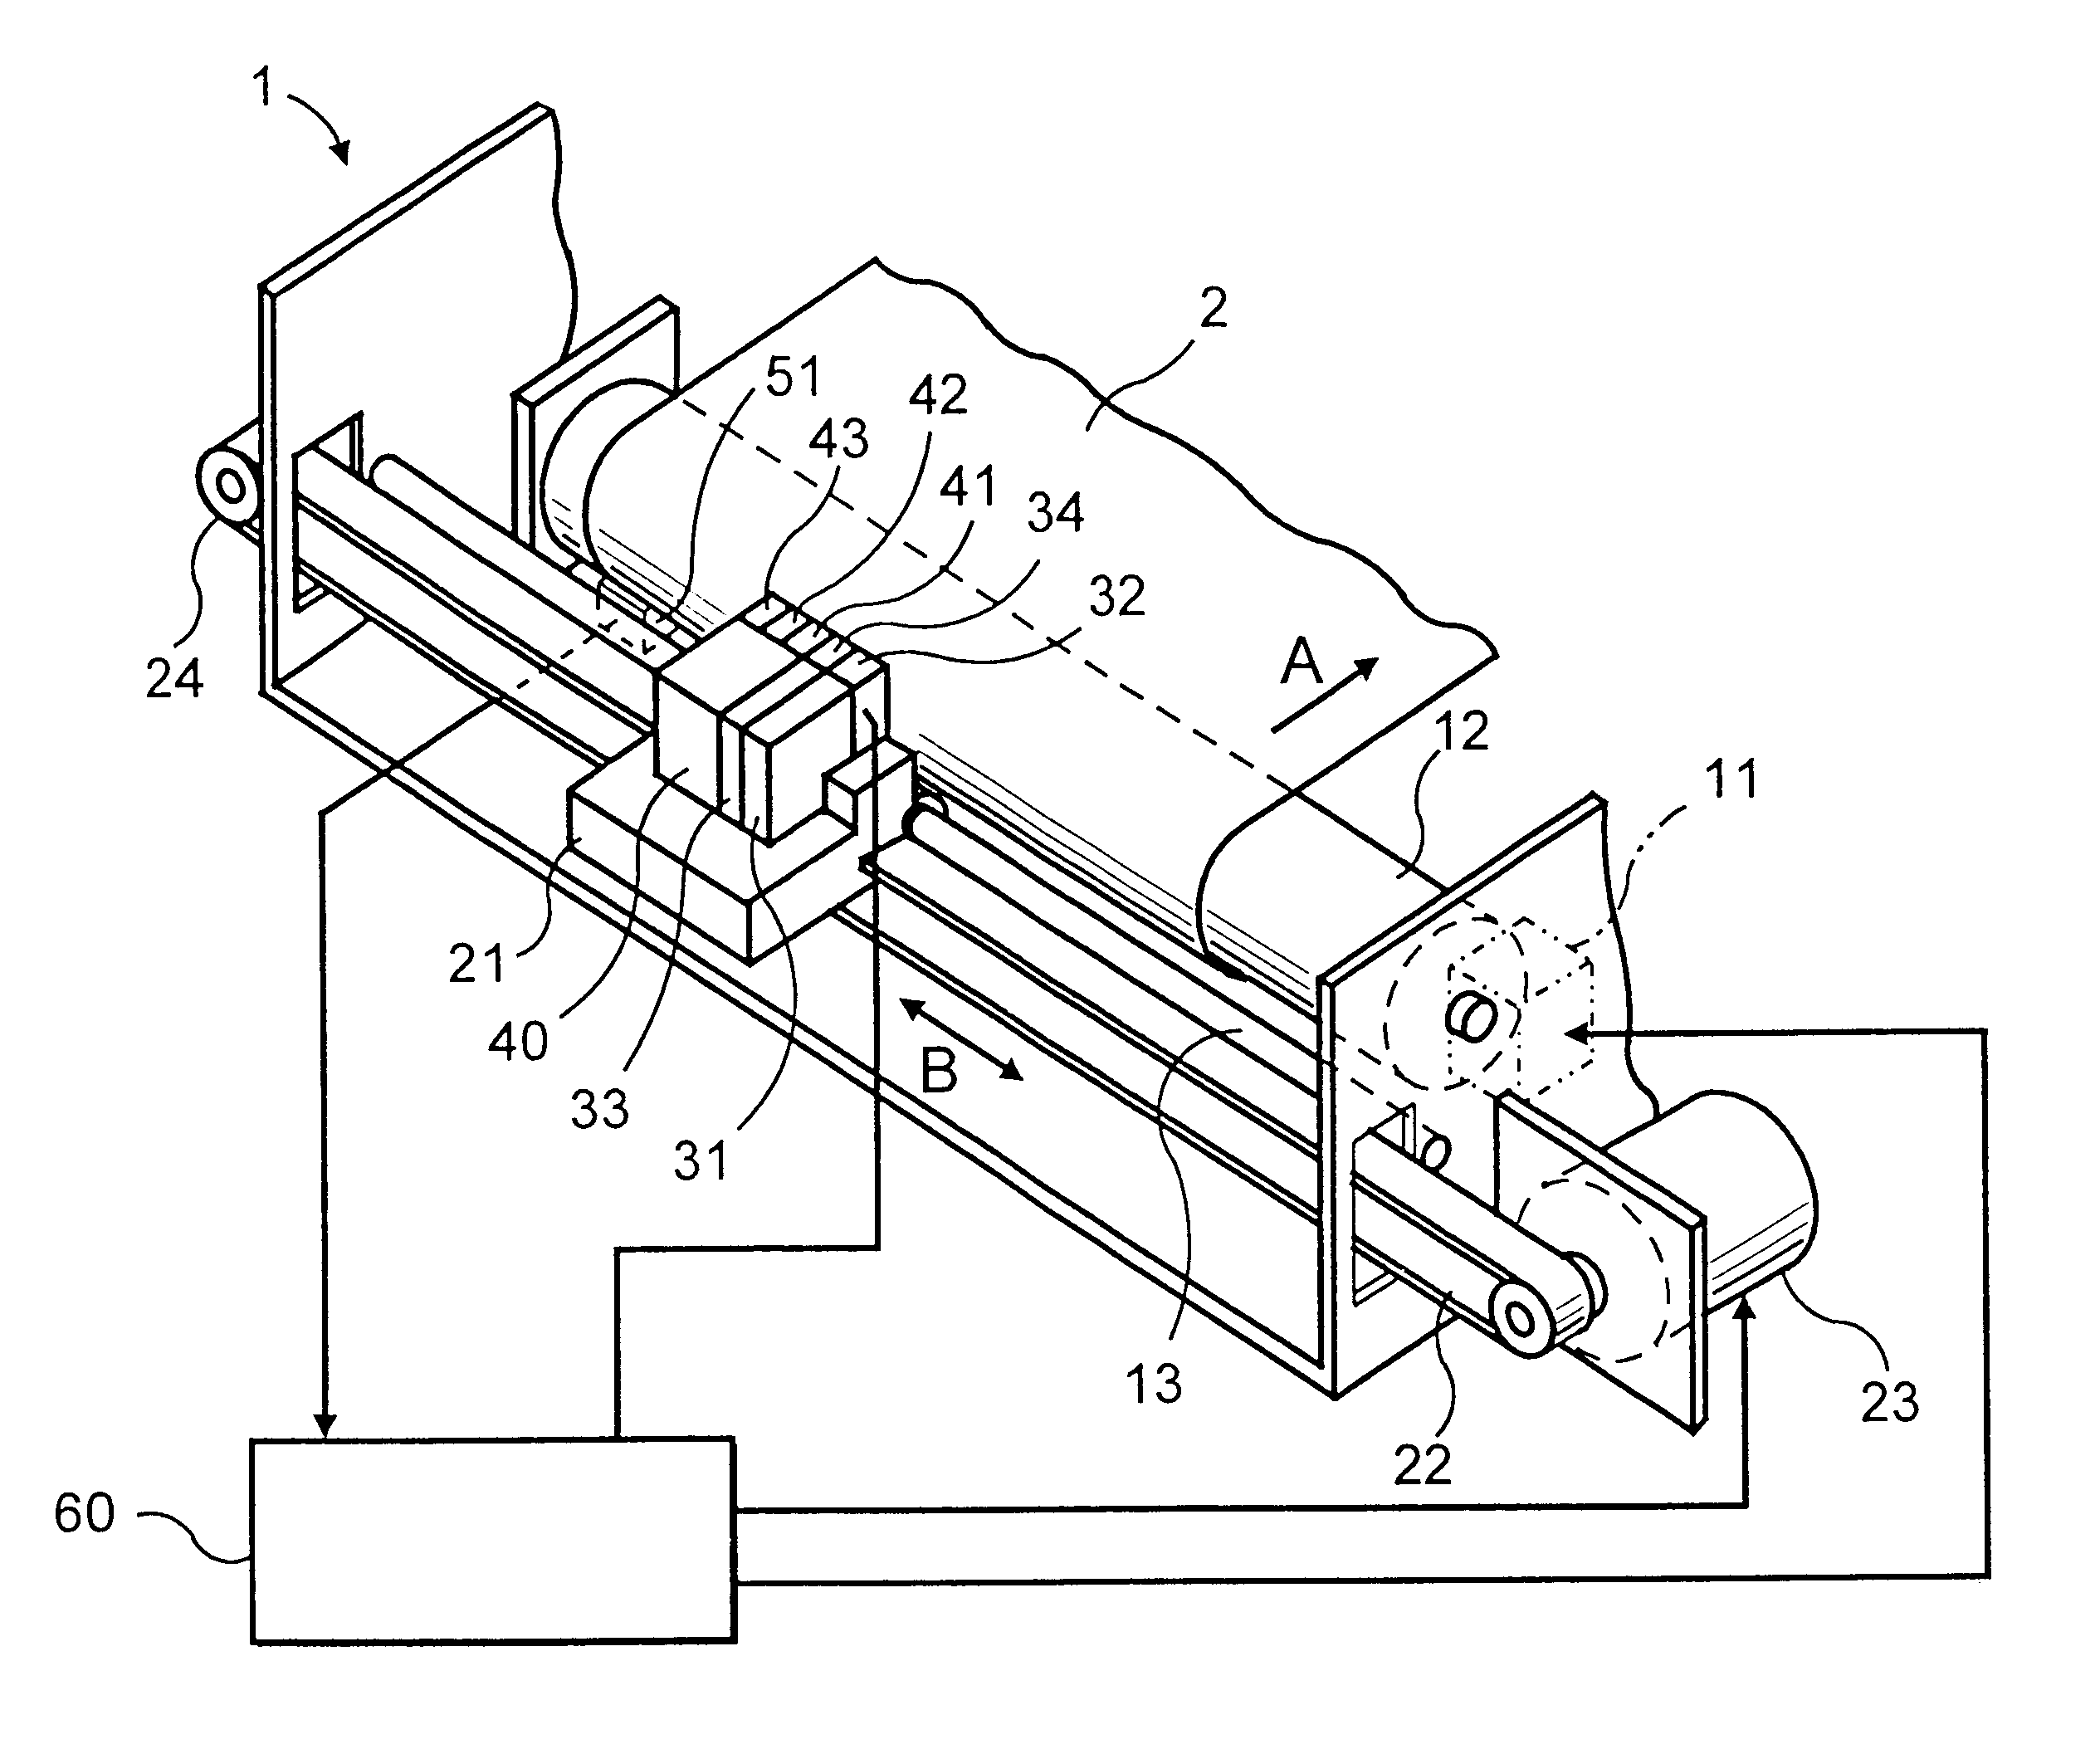 Ink jet recording method and apparatus for forming an image on either plain paper or a specialty recording medium